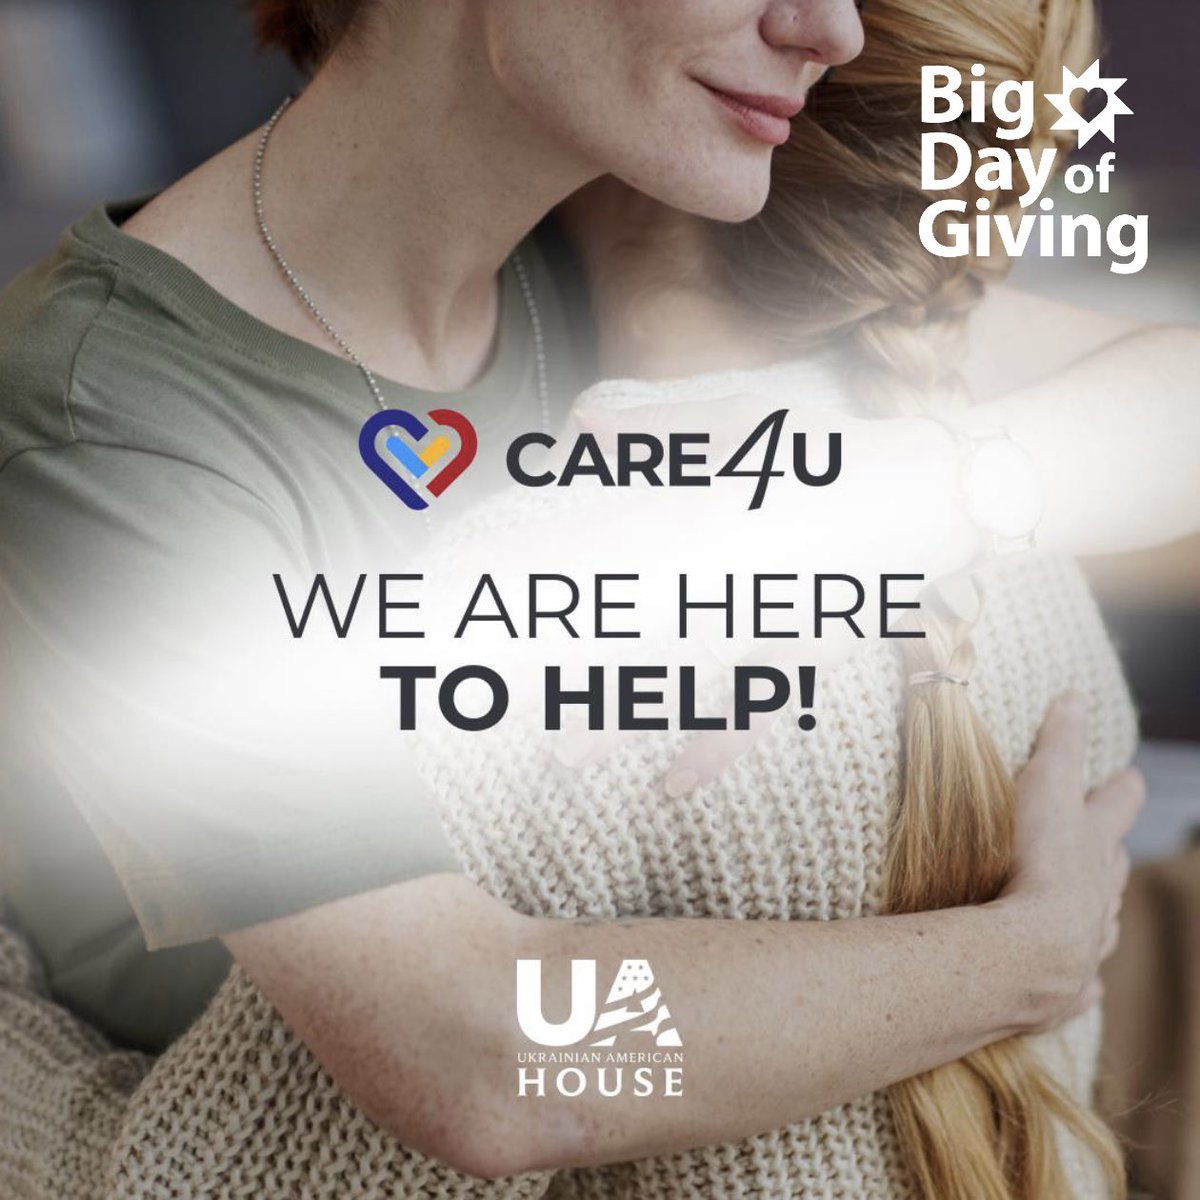 A strong nonprofit sector benefits everyone. @bigdayofgiving 

This year, part of your donations will be channeled towards our recently launched Care4U program, which is dedicated to providing mental health support to refugees. 

bigdayofgiving.org/organization/U…

#bigdayofgiving #uahouse